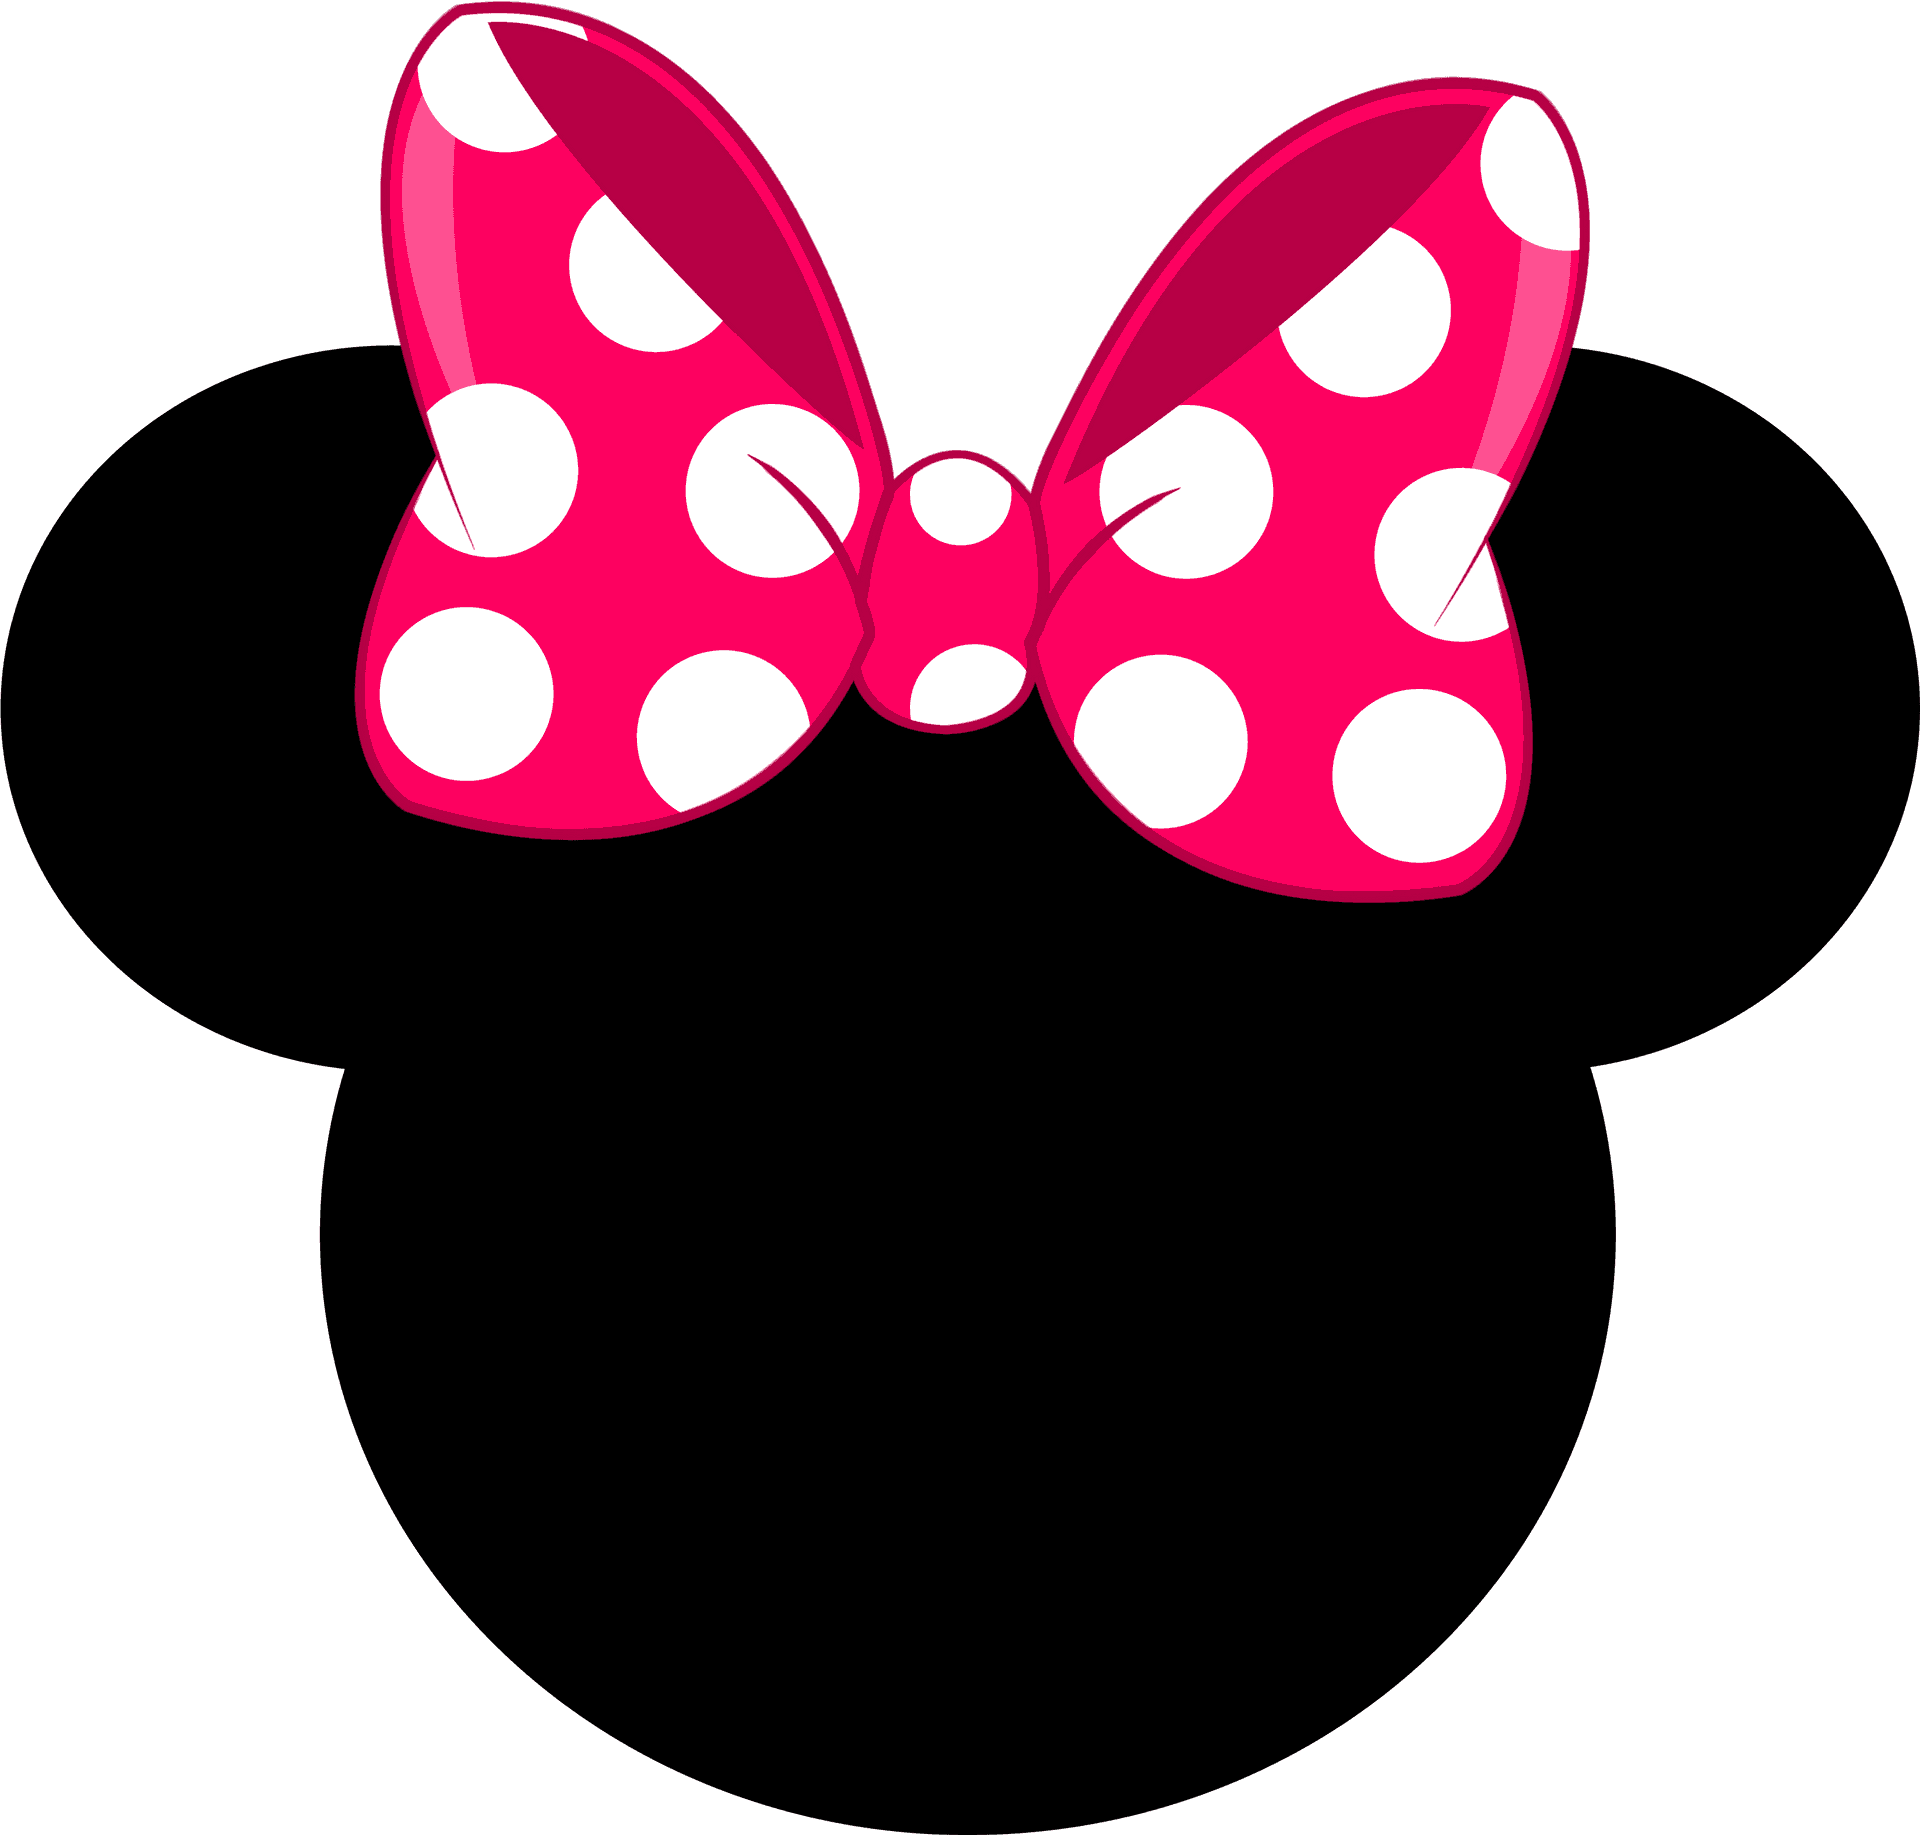 Minnie Mouse Ears Icon PNG image